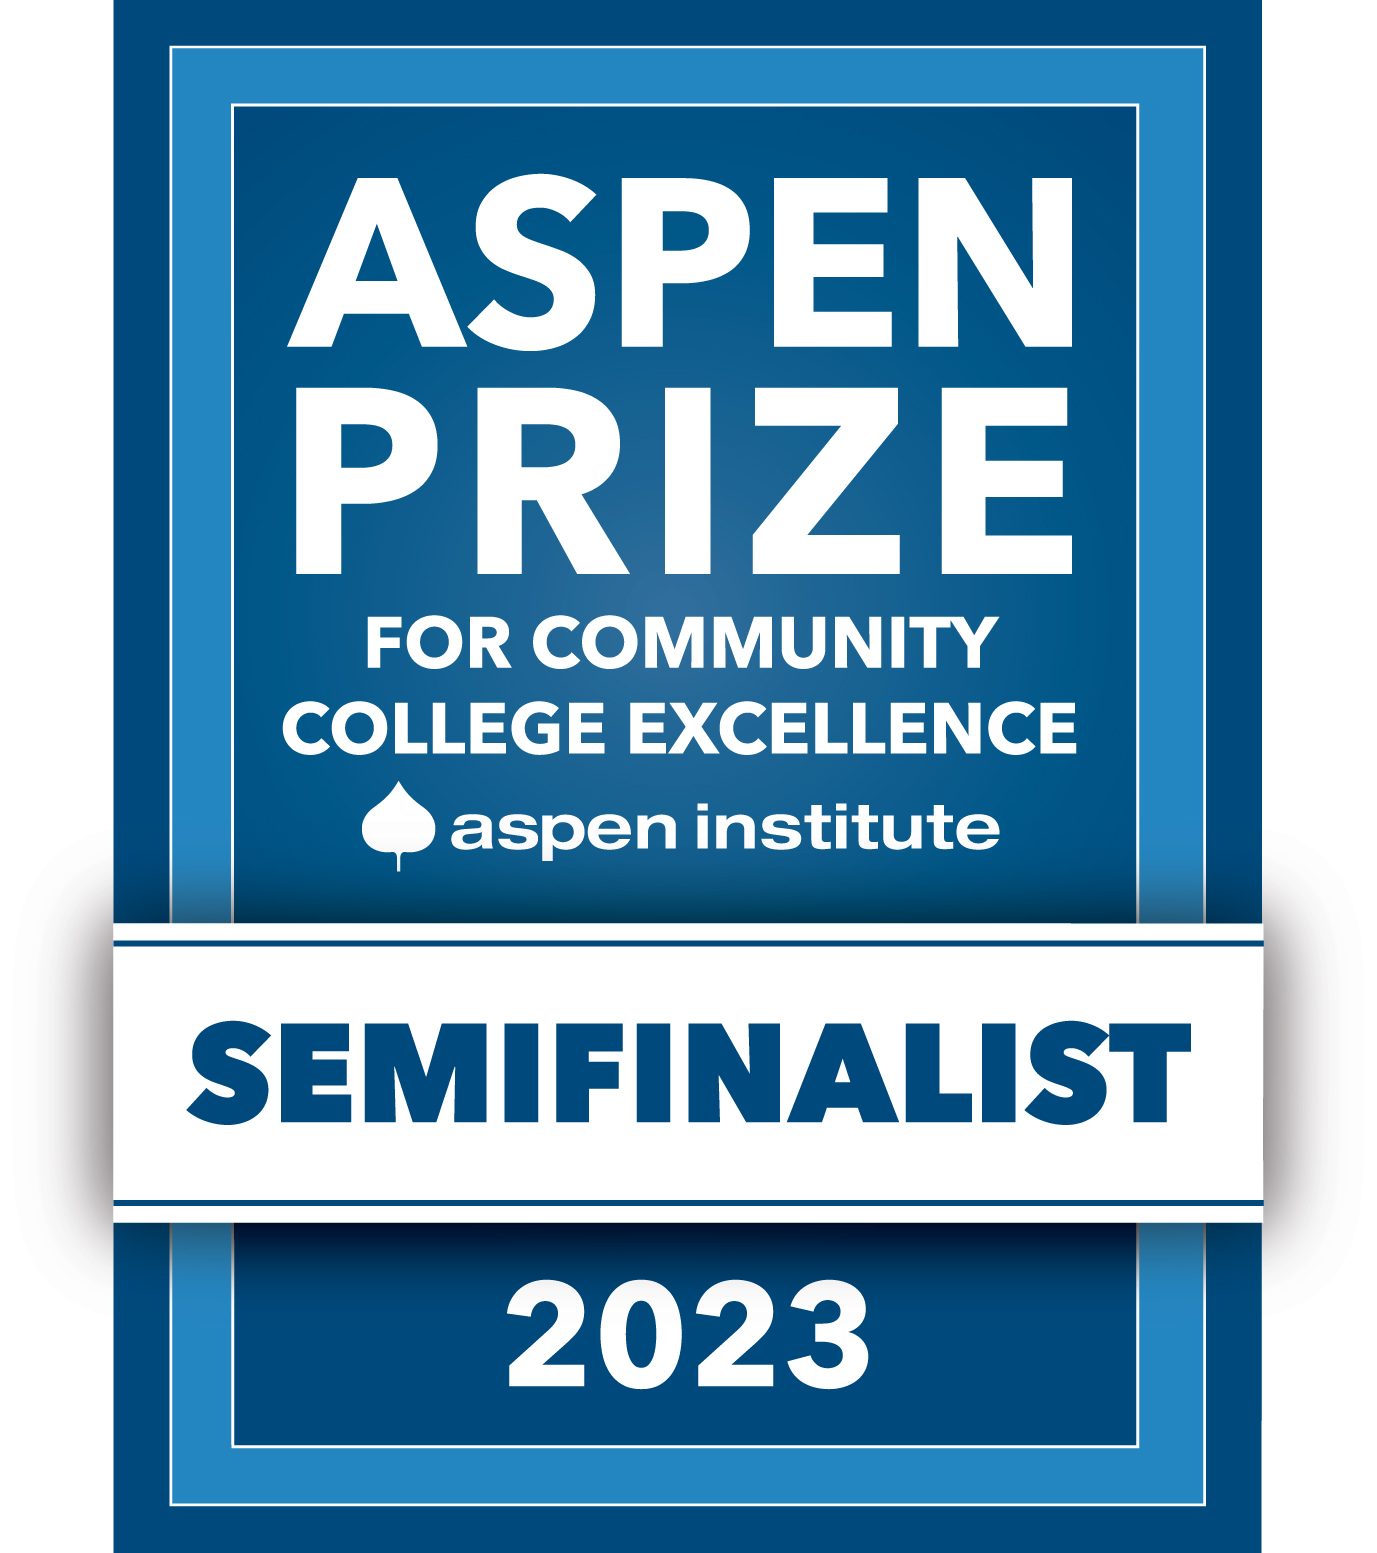 The photo of the Aspen Prize Semifinalist badge.